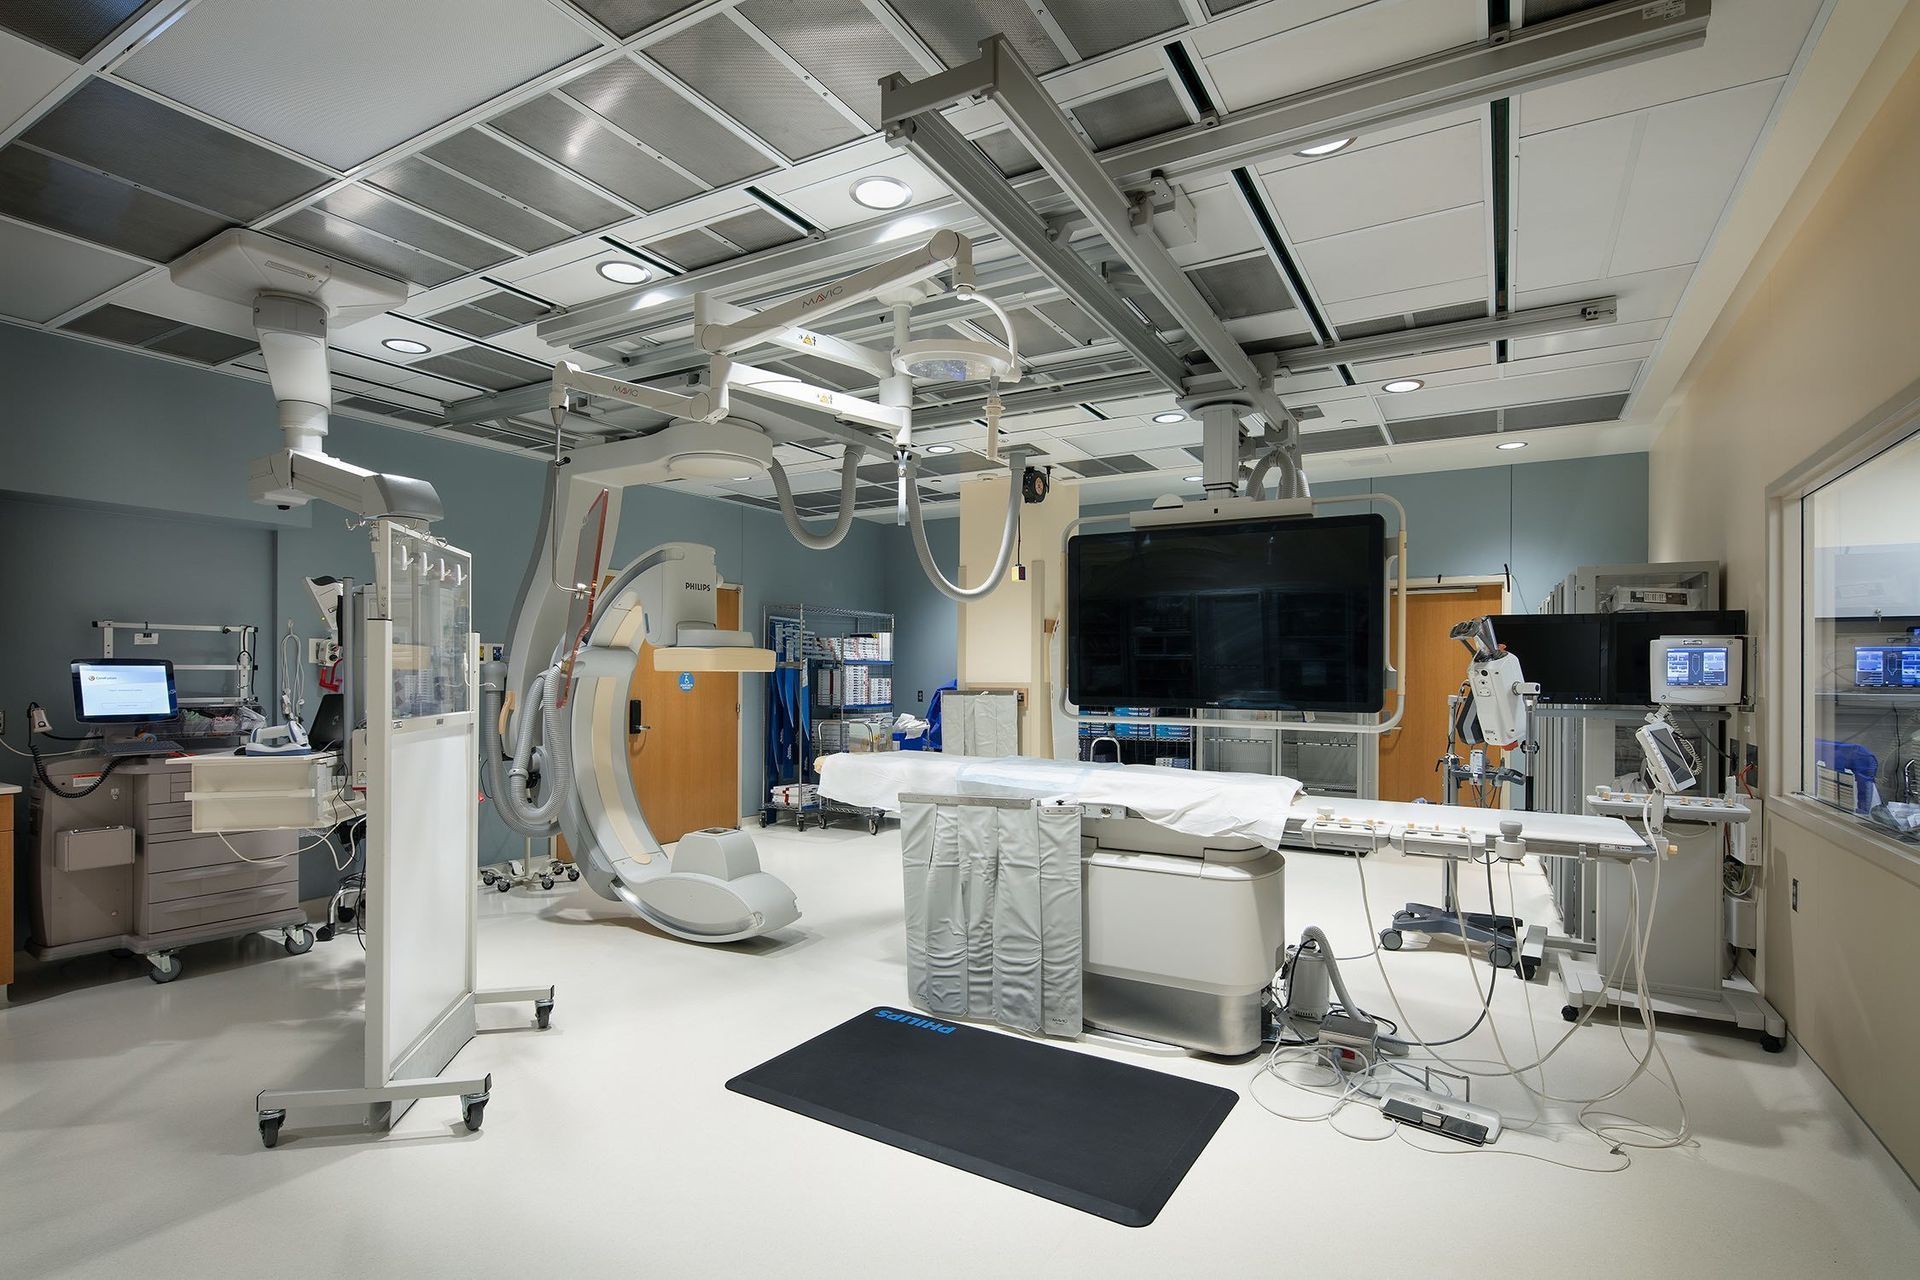 A large operating room in a hospital with lots of medical equipment.